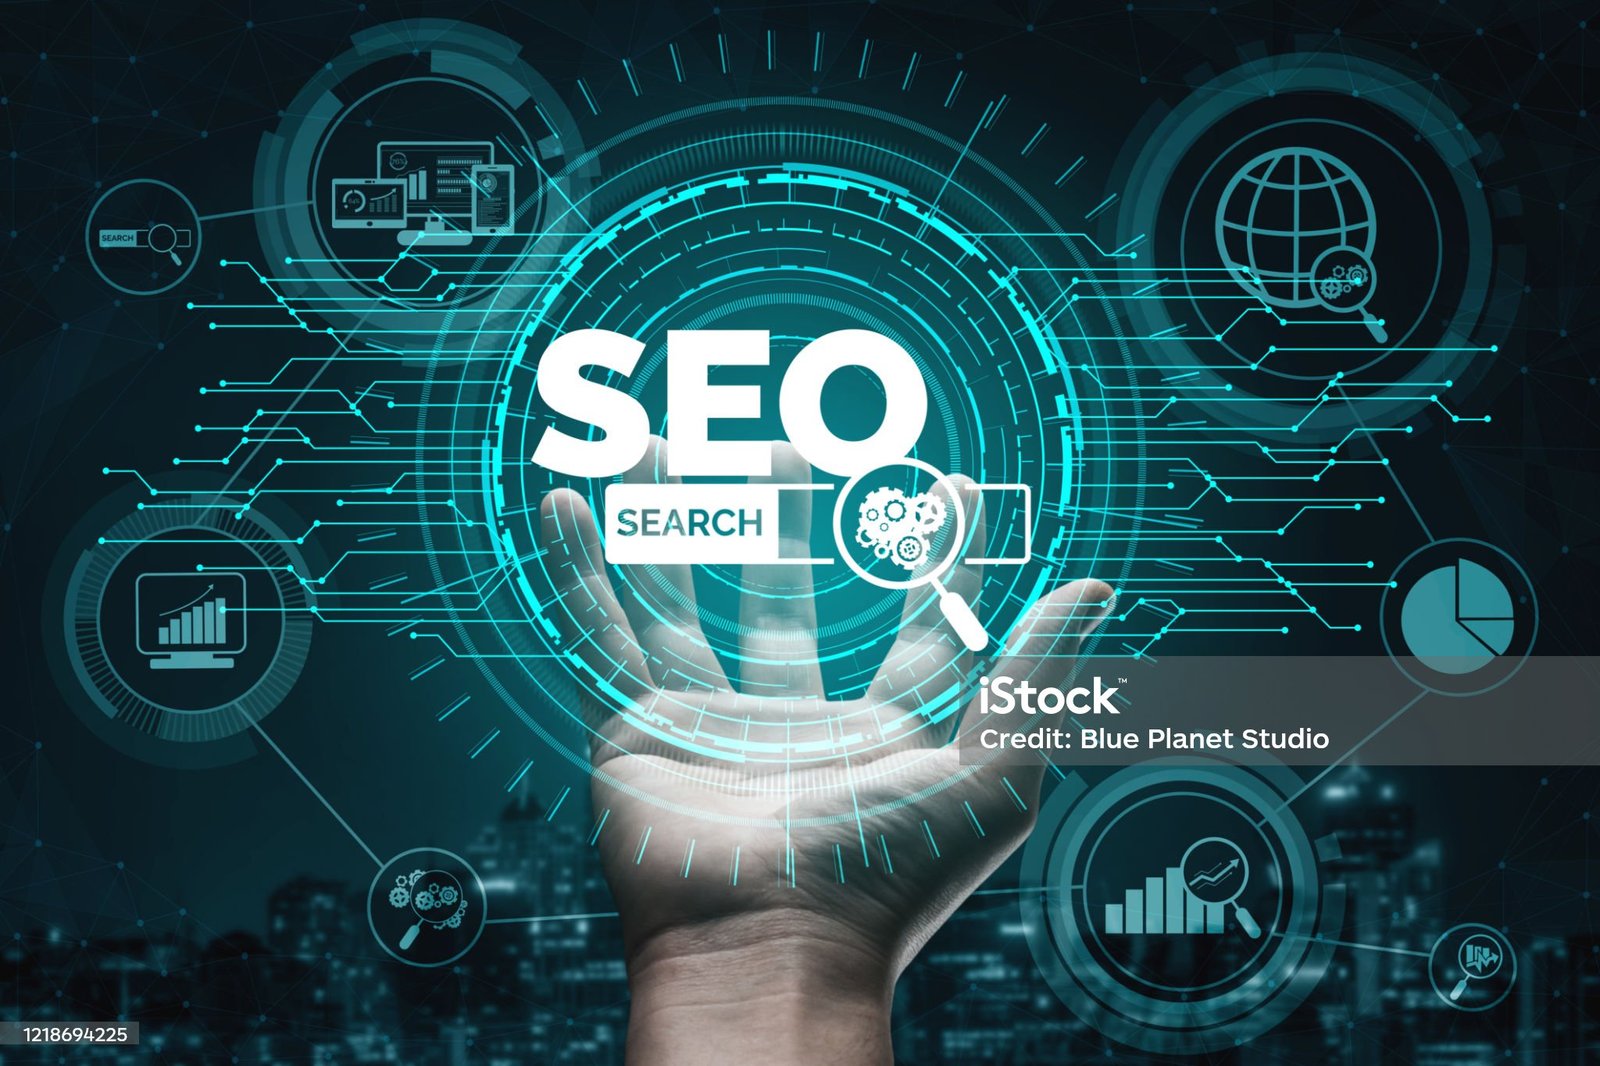 Global SEO for Businesses